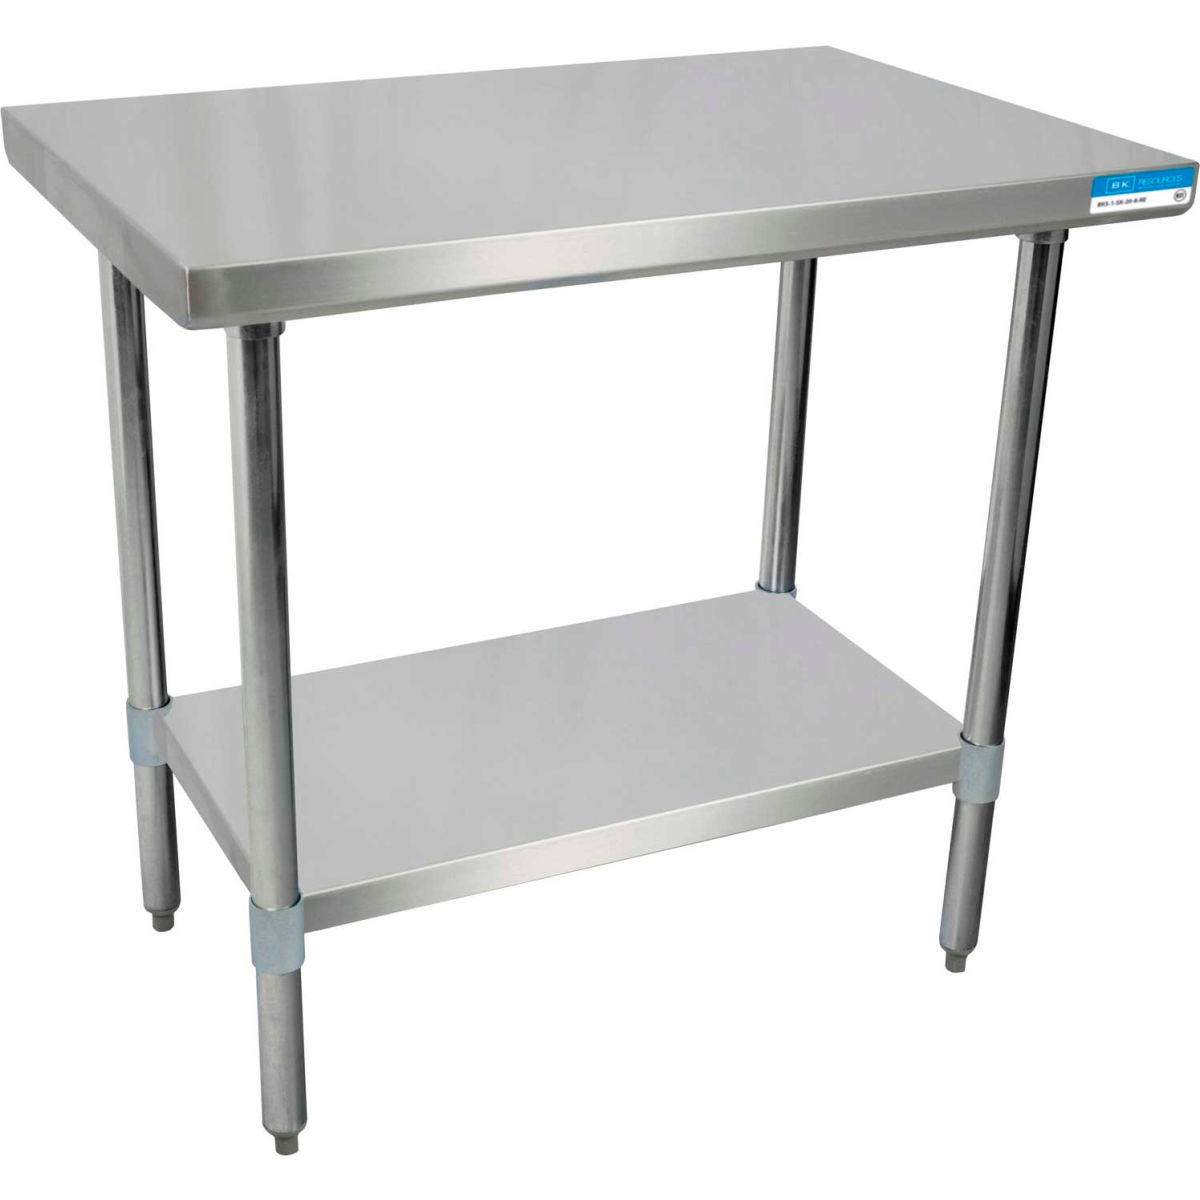 Picture of BK Resources B0899550 18 Gauge 430 Series Stainless Workbench with Adjustable Undershelf - 36 x 24 in.